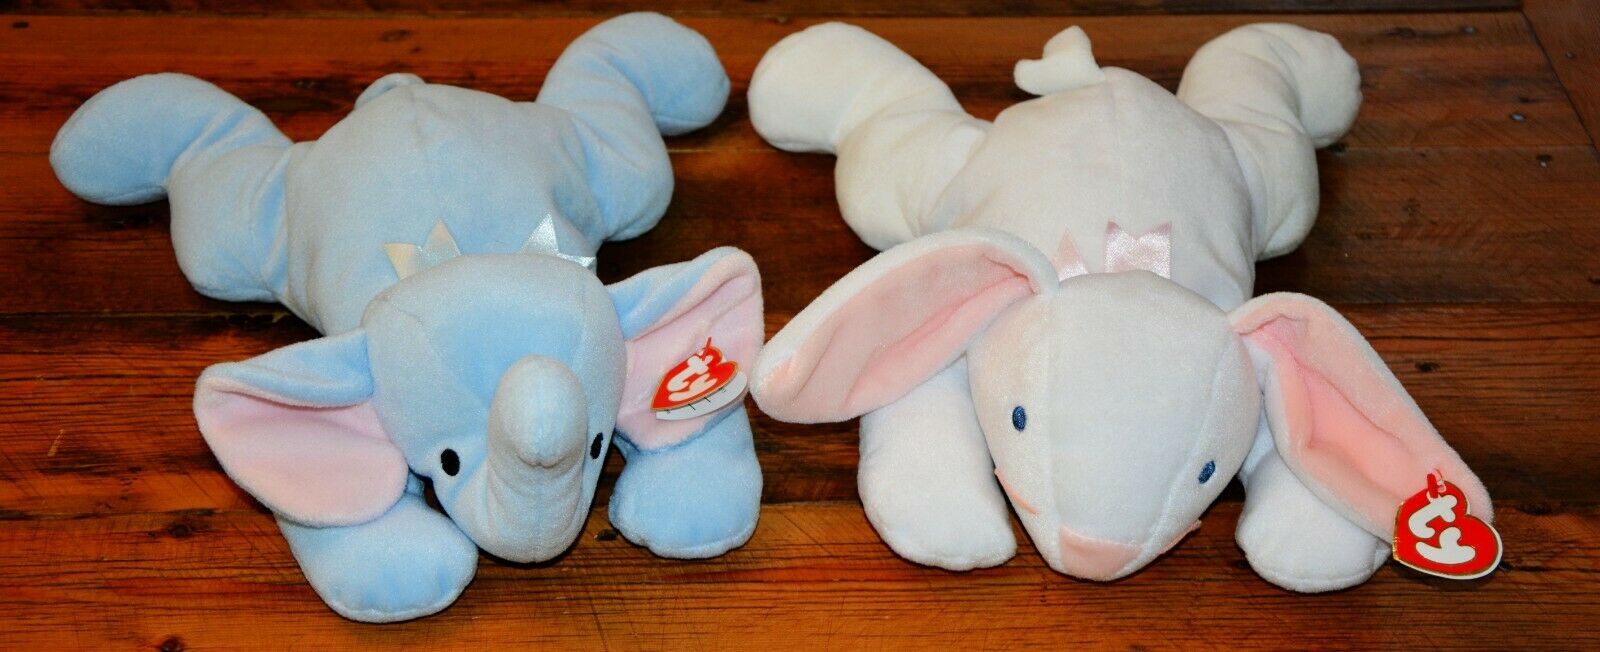 TY Pillow Pals Squirt Elephant Plush Blue and Clover White Bunny 14